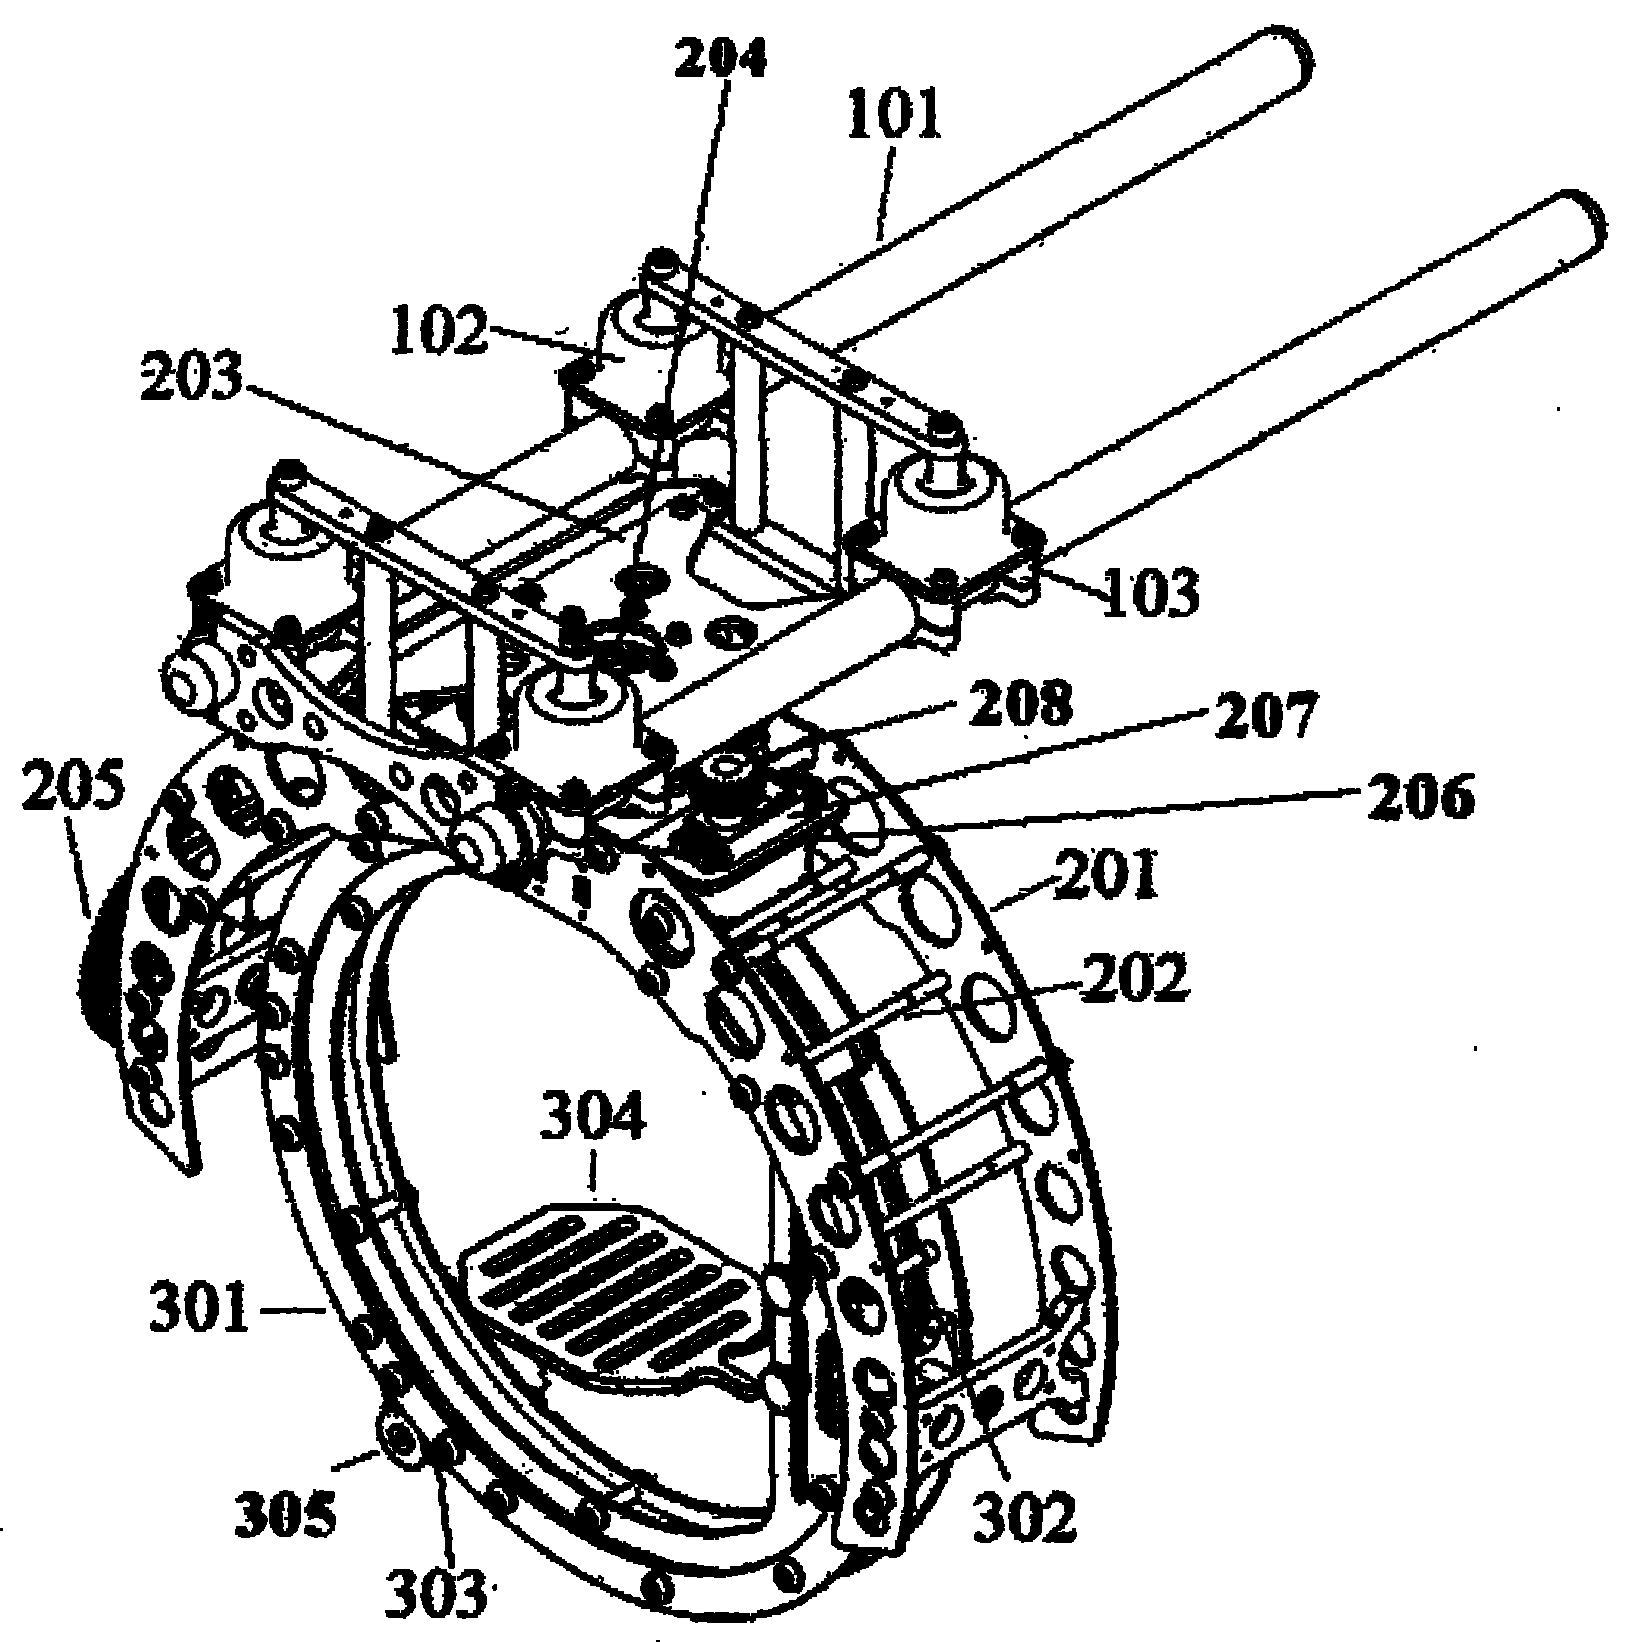 Airborne tripod head apparatus for collecting aerial information and use thereof